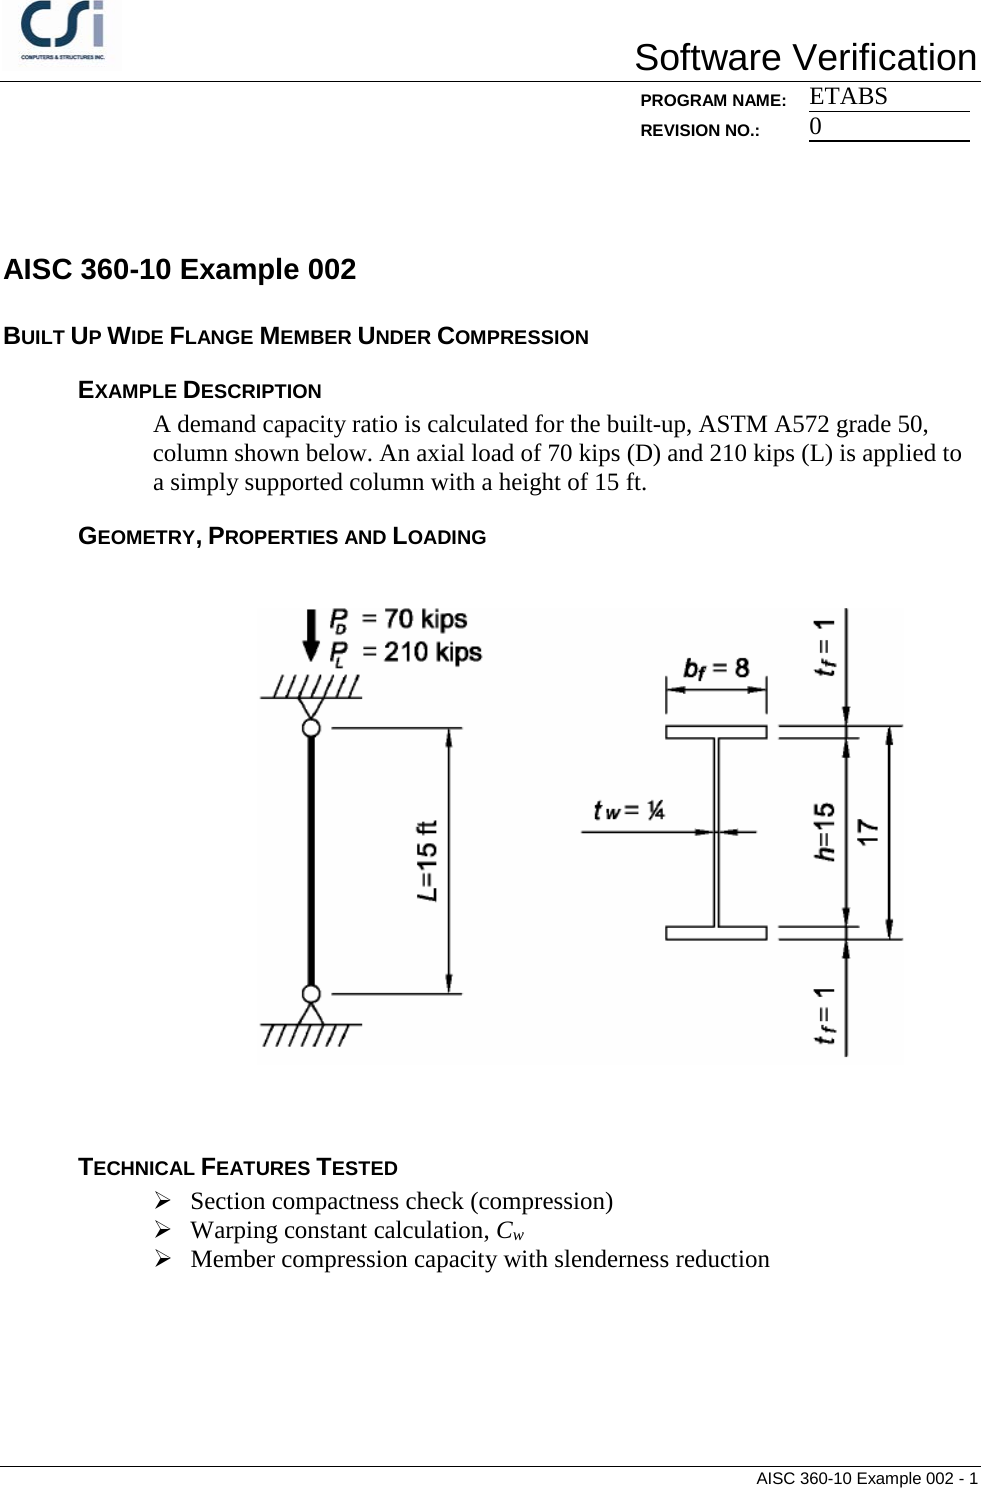 Page 1 of 6 - Contents AISC 360-10 Example 002